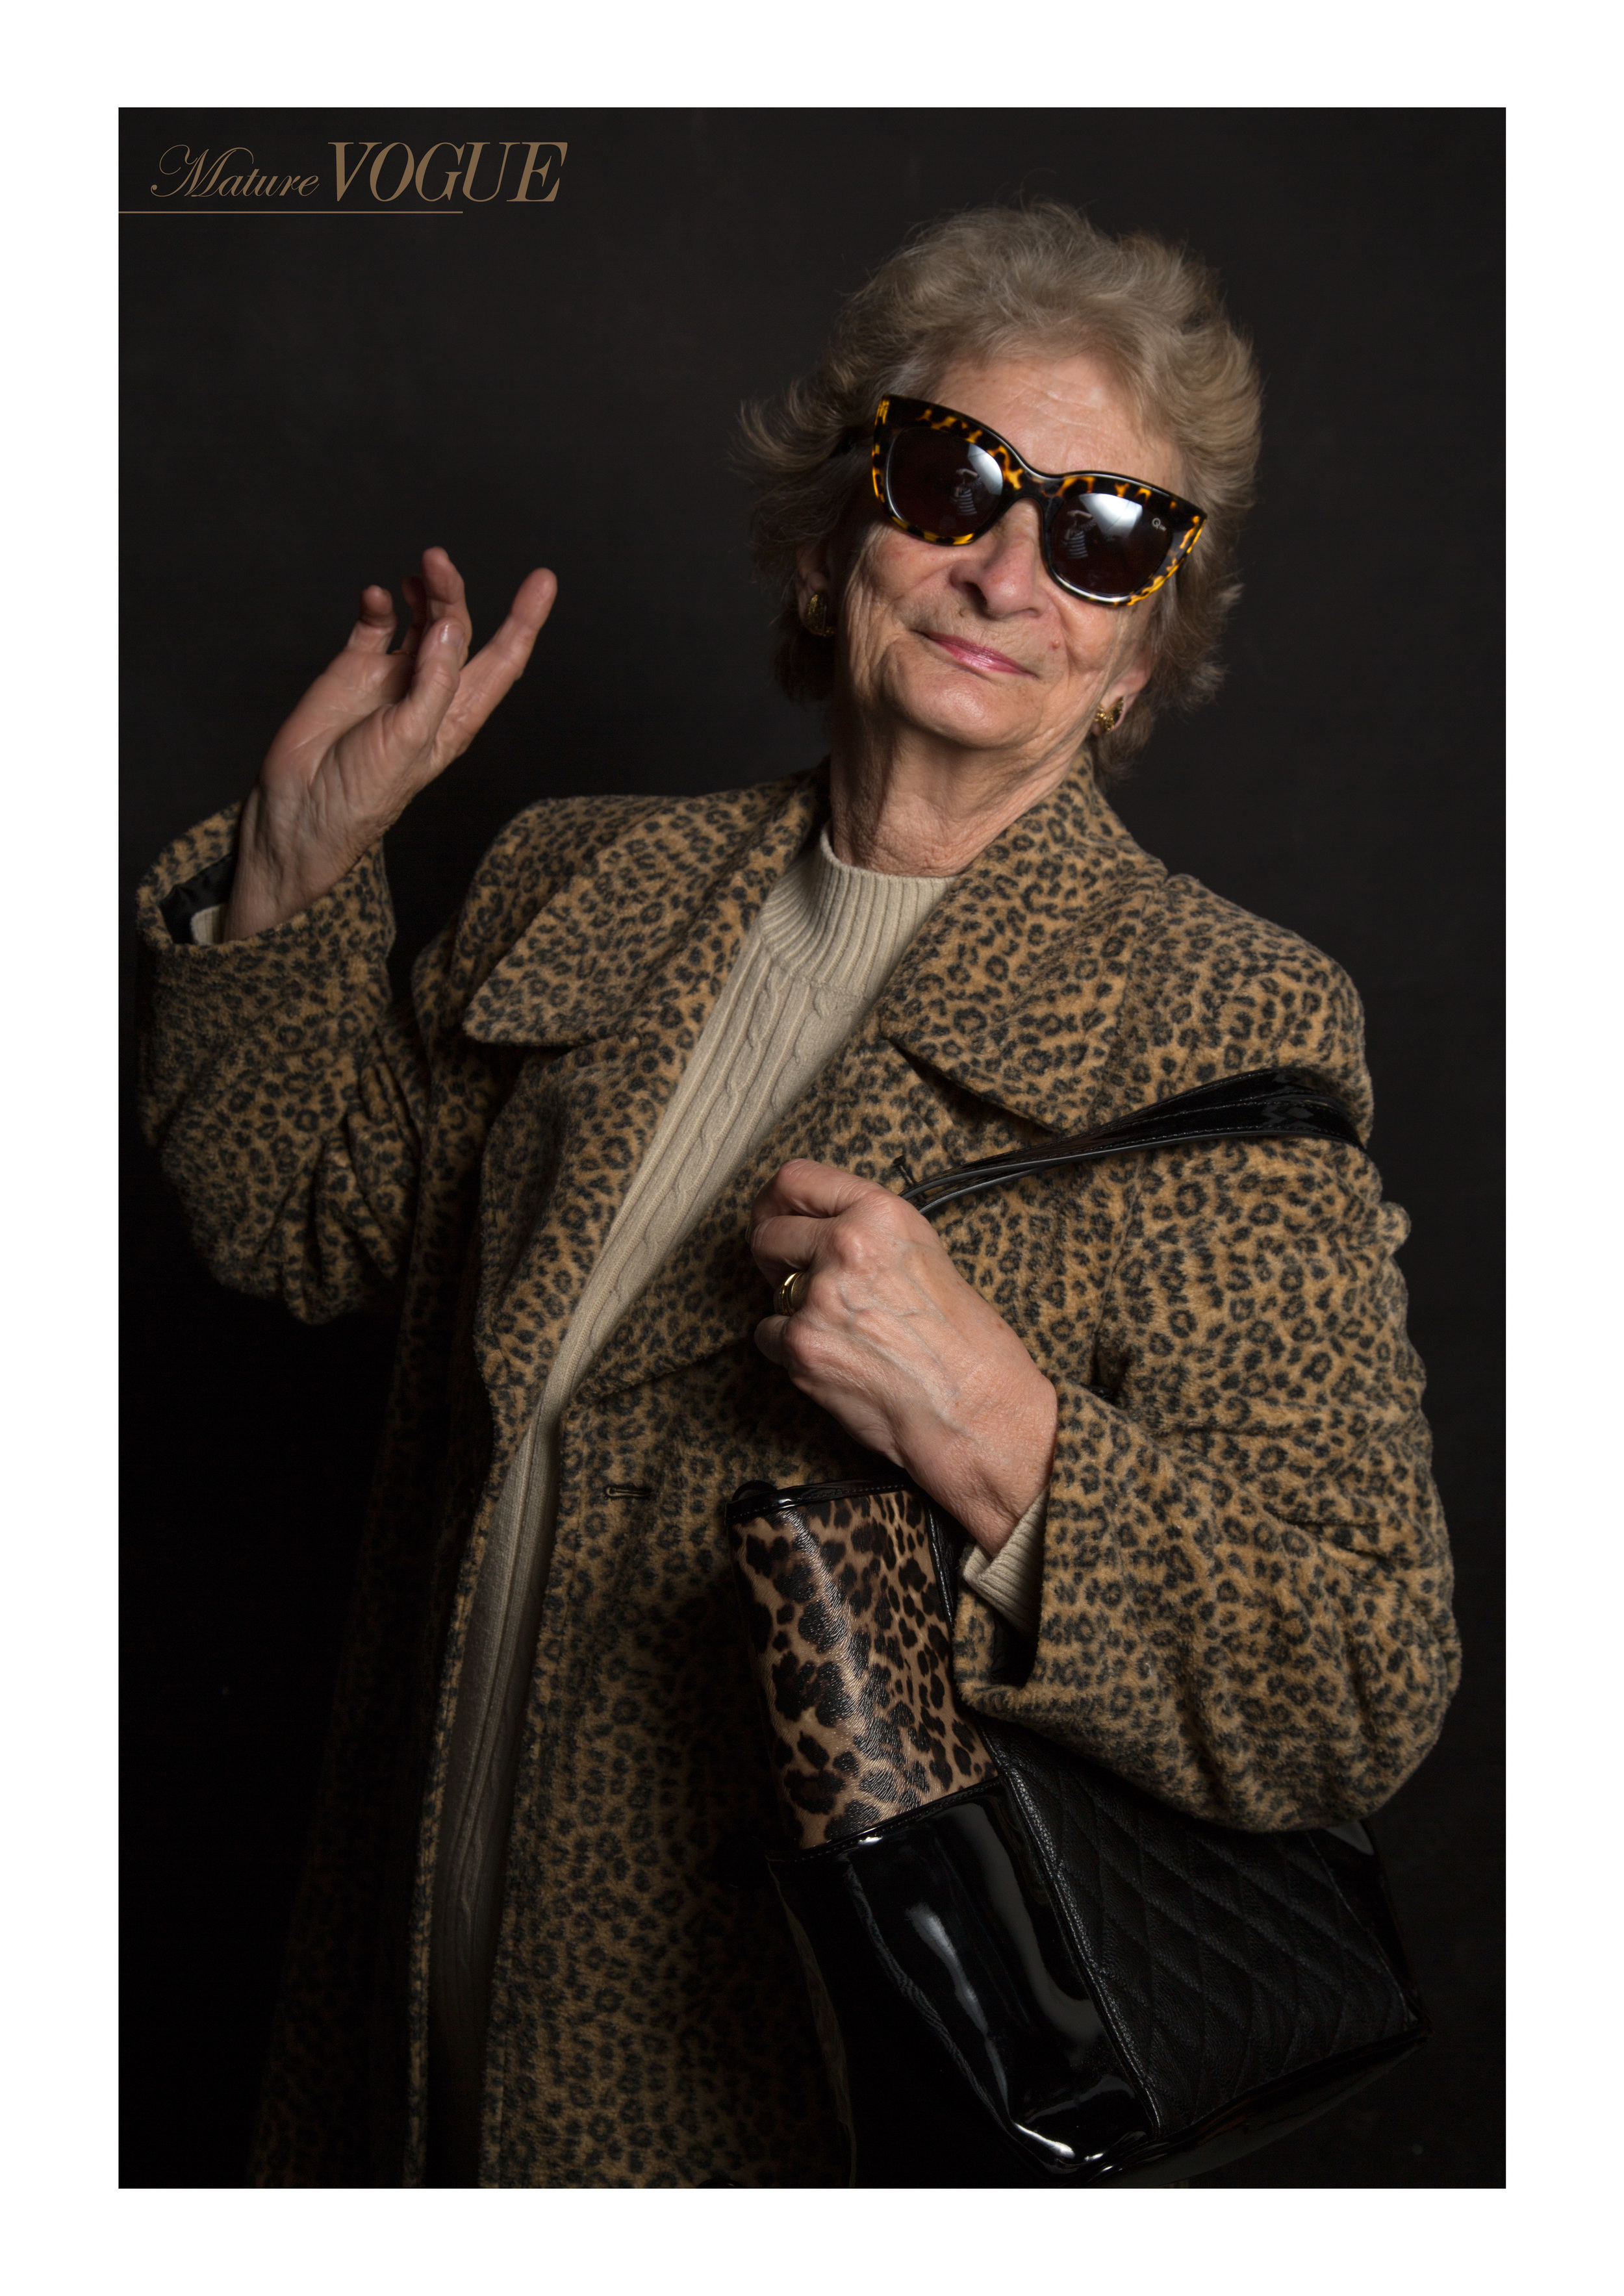  Personal Work- Older women beauty "Changing The Face Of Vogue #5" 